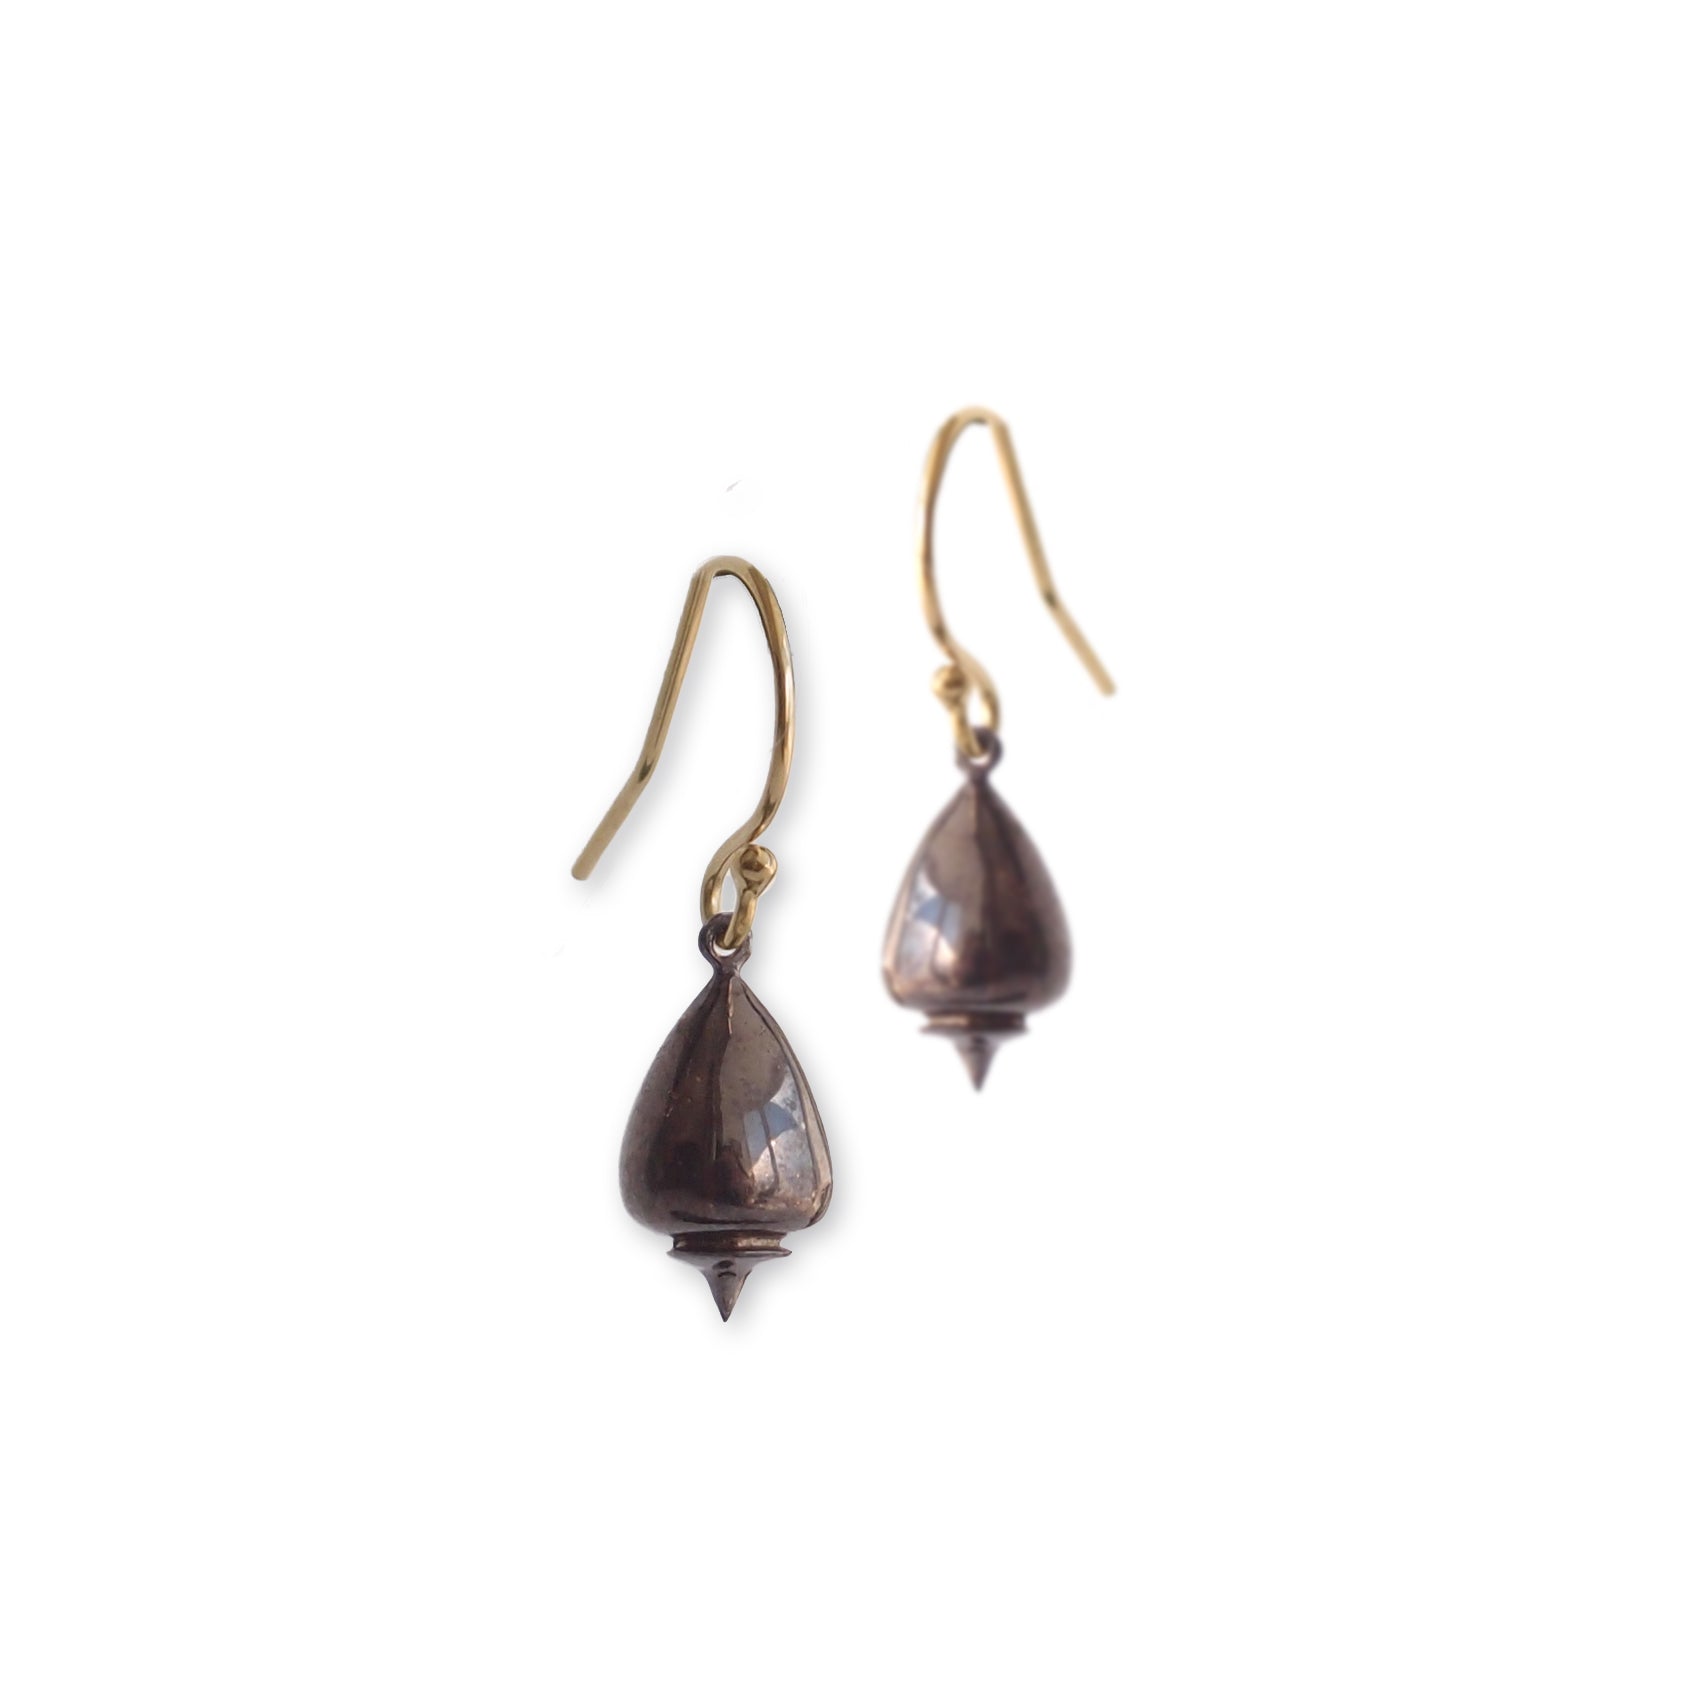 sterling silver plated in black rhodium with 14k yellow gold earwires plomb drop earrings